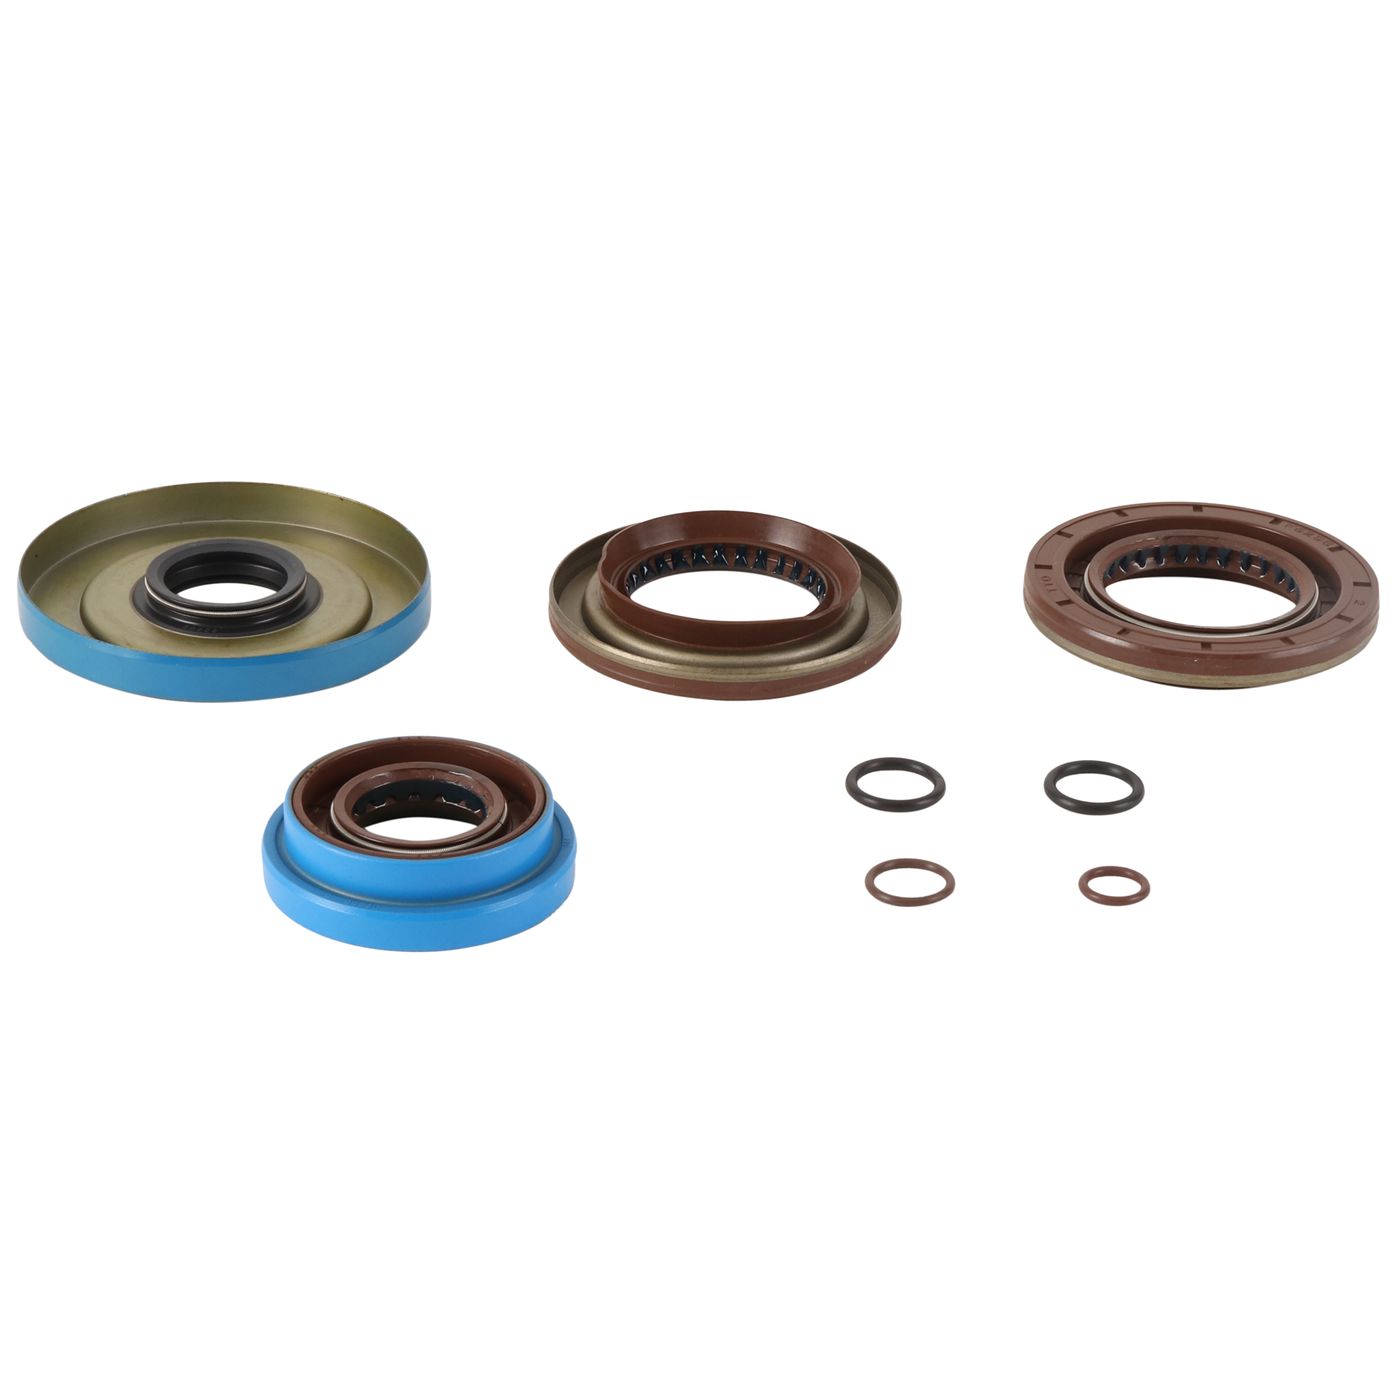 Wrp Diff Seal Kits - WRP252125-5 image